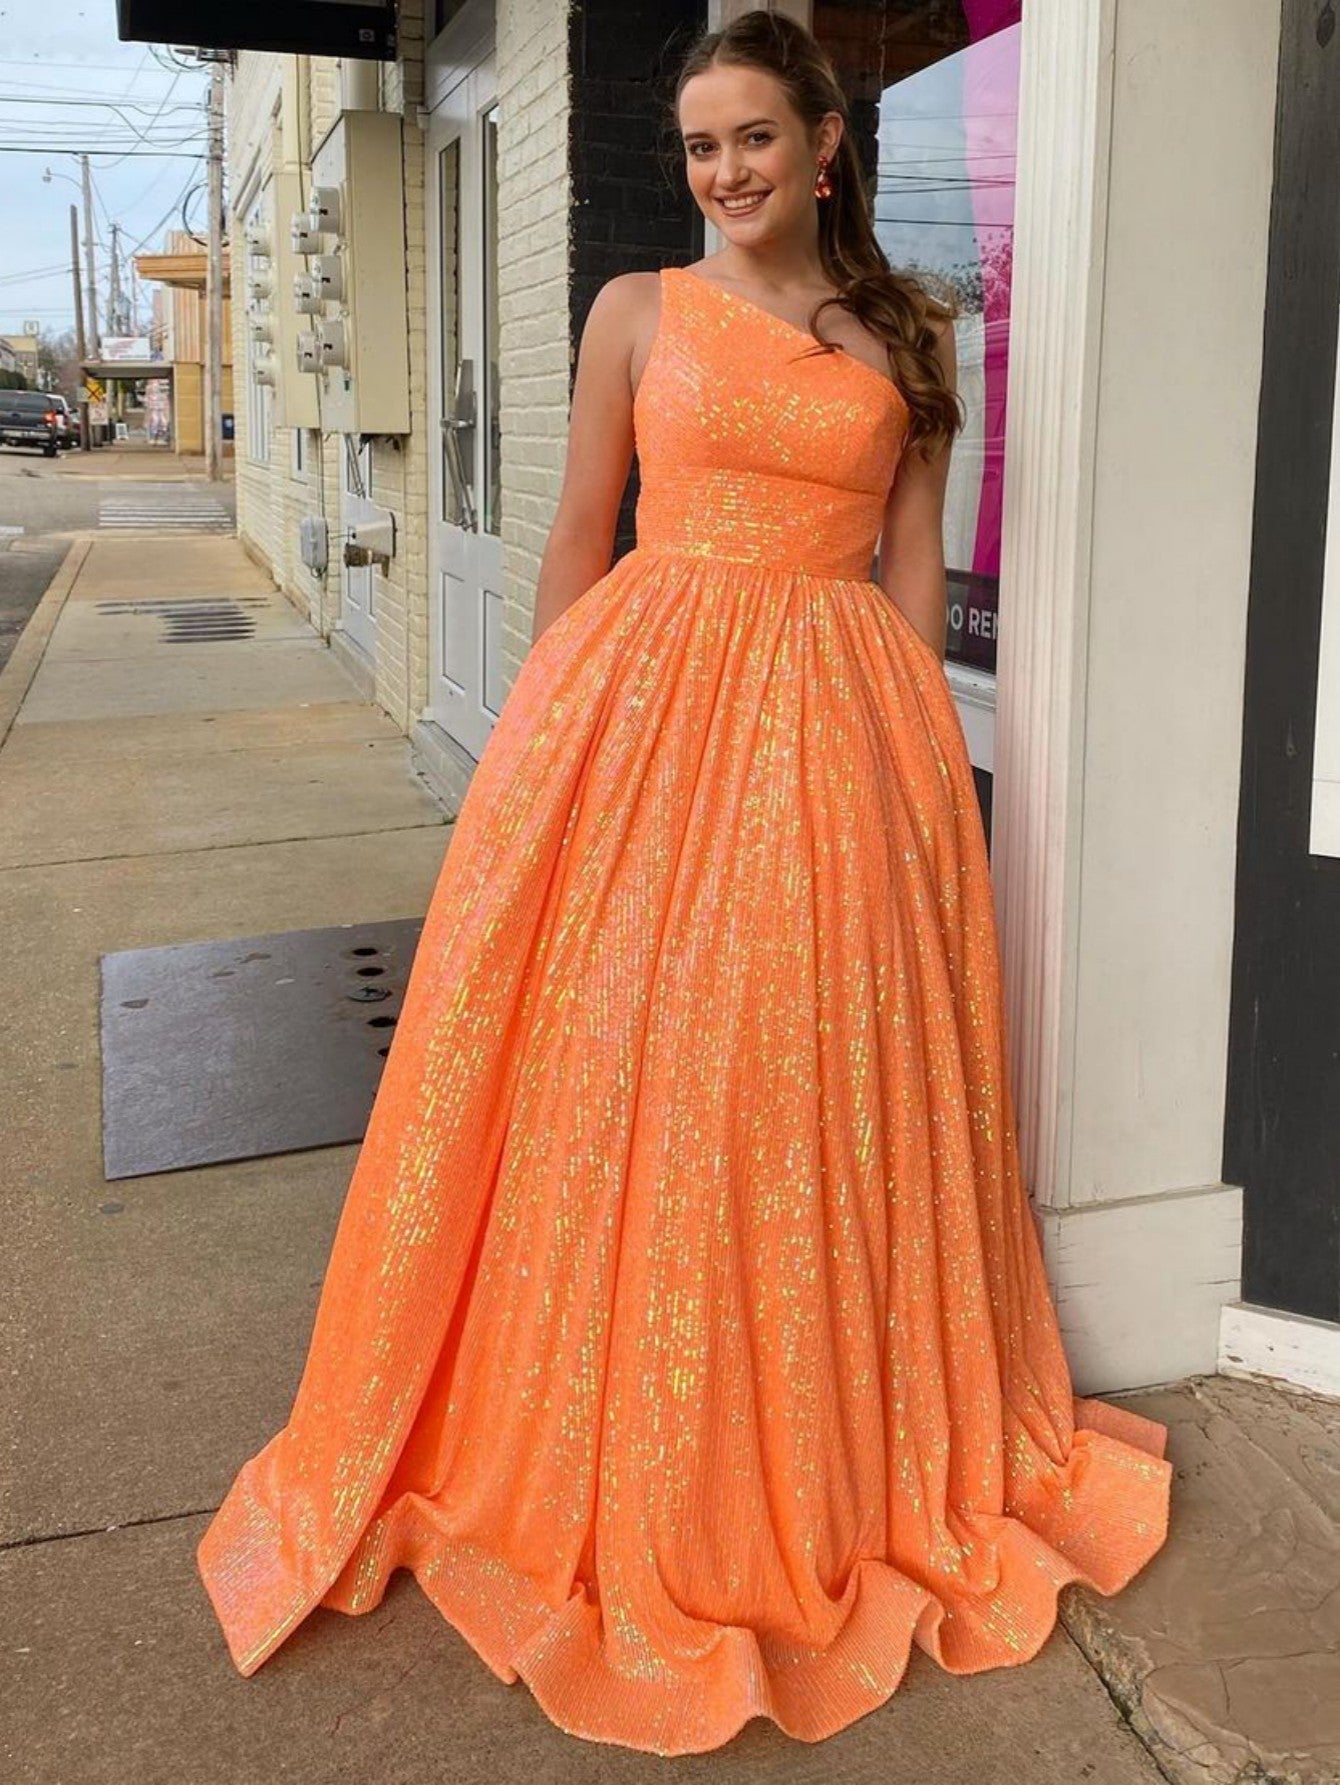 Shop simple v-neck satin yellow prom dress with pockets from Hocogirl.com